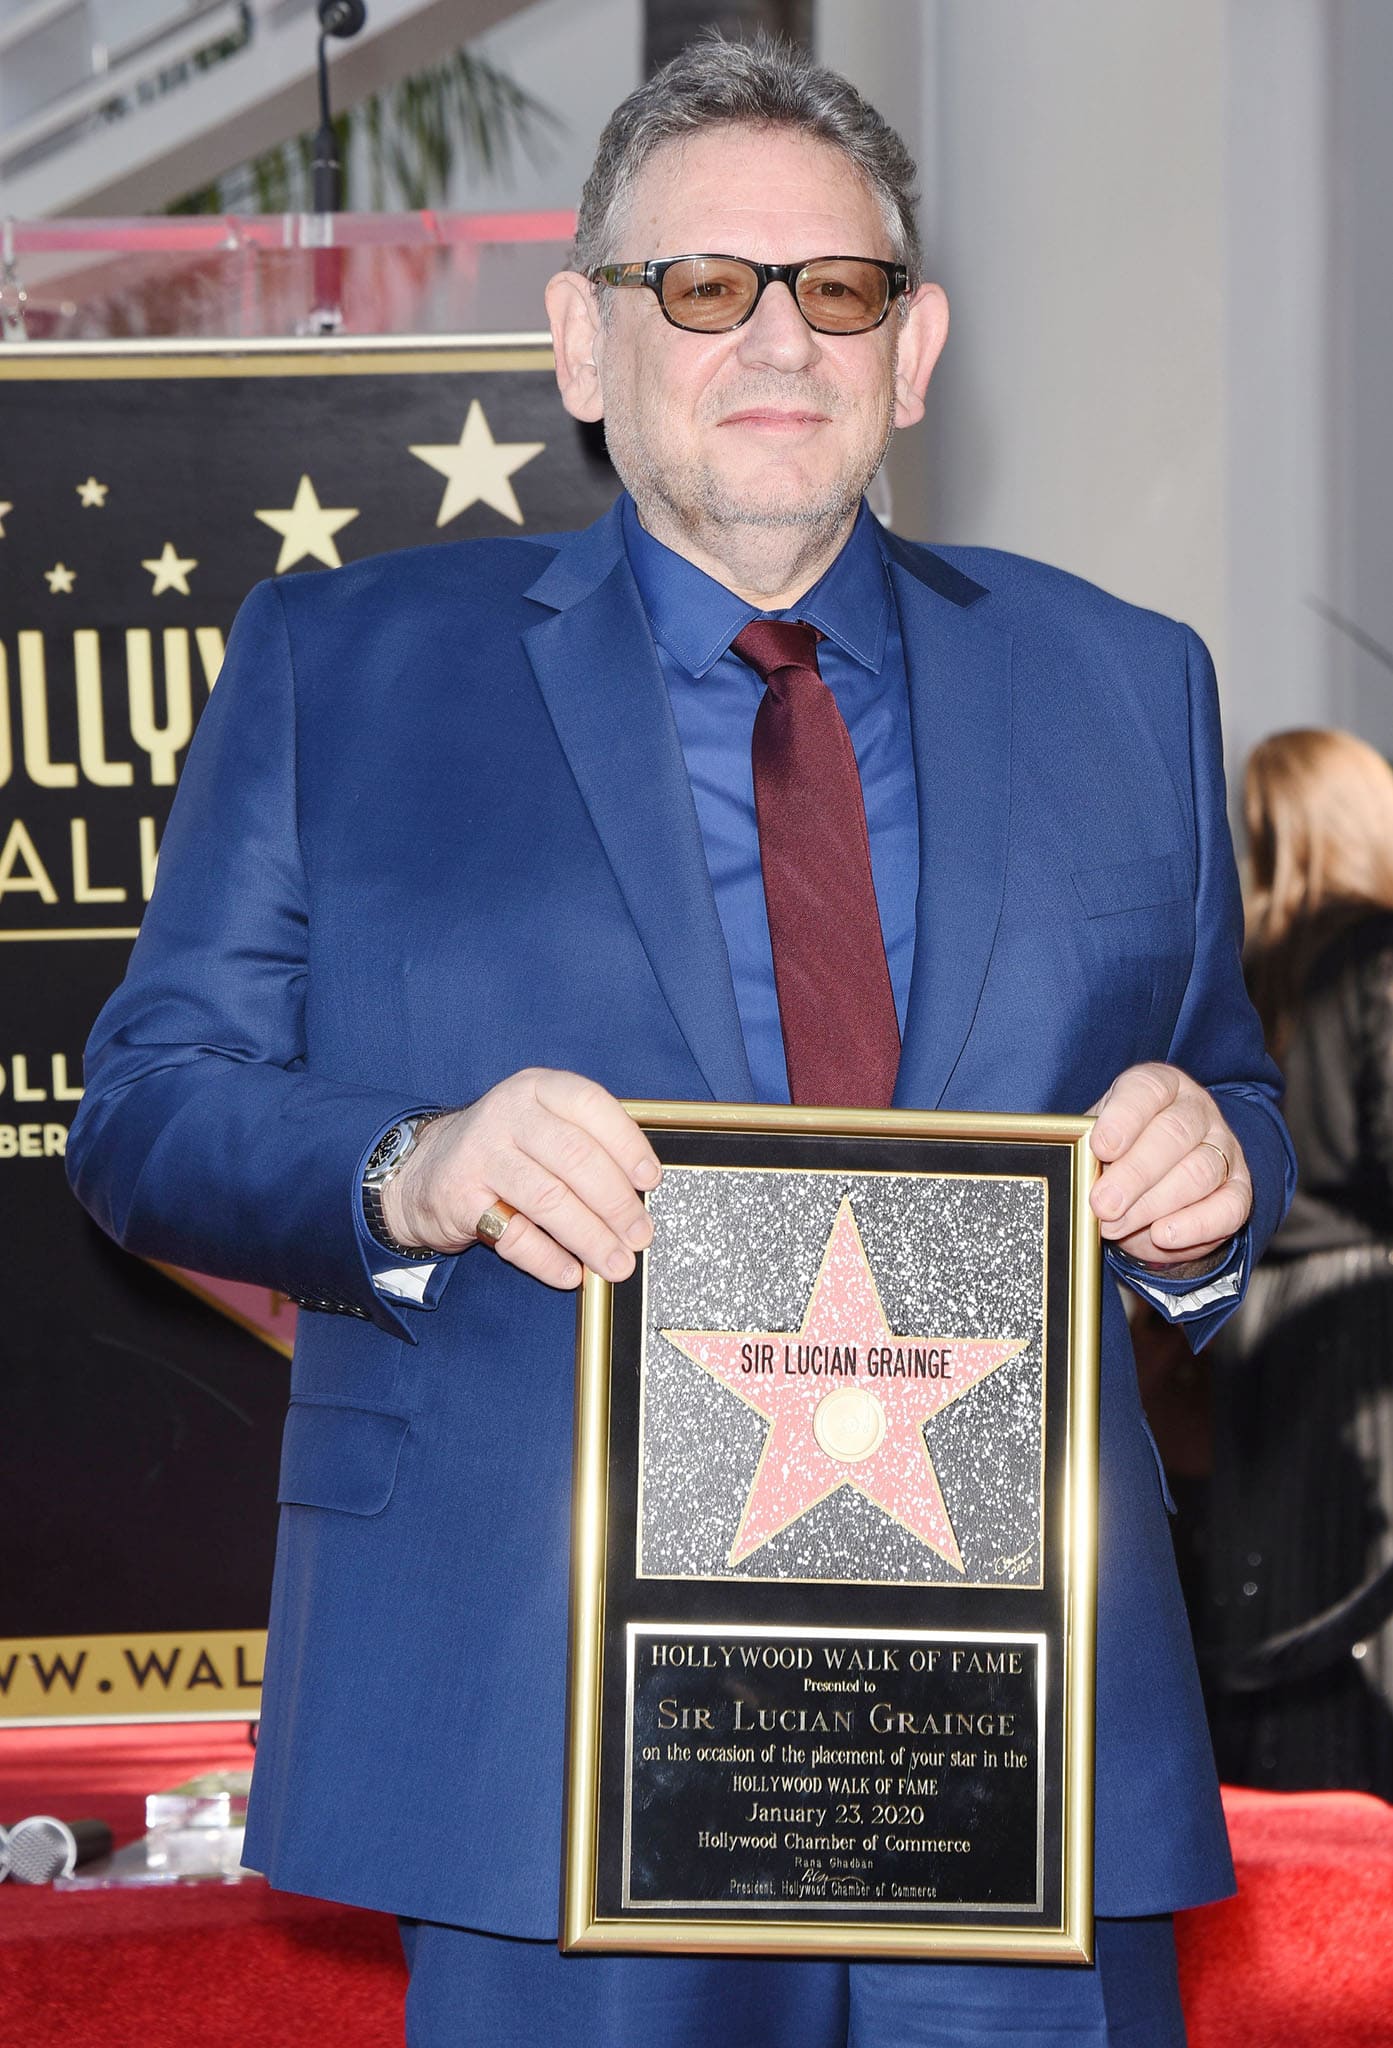 Elliot Grainge's dad Sir Lucian Grainge receives a star on the Hollywood Walk of Fame on January 23, 2020